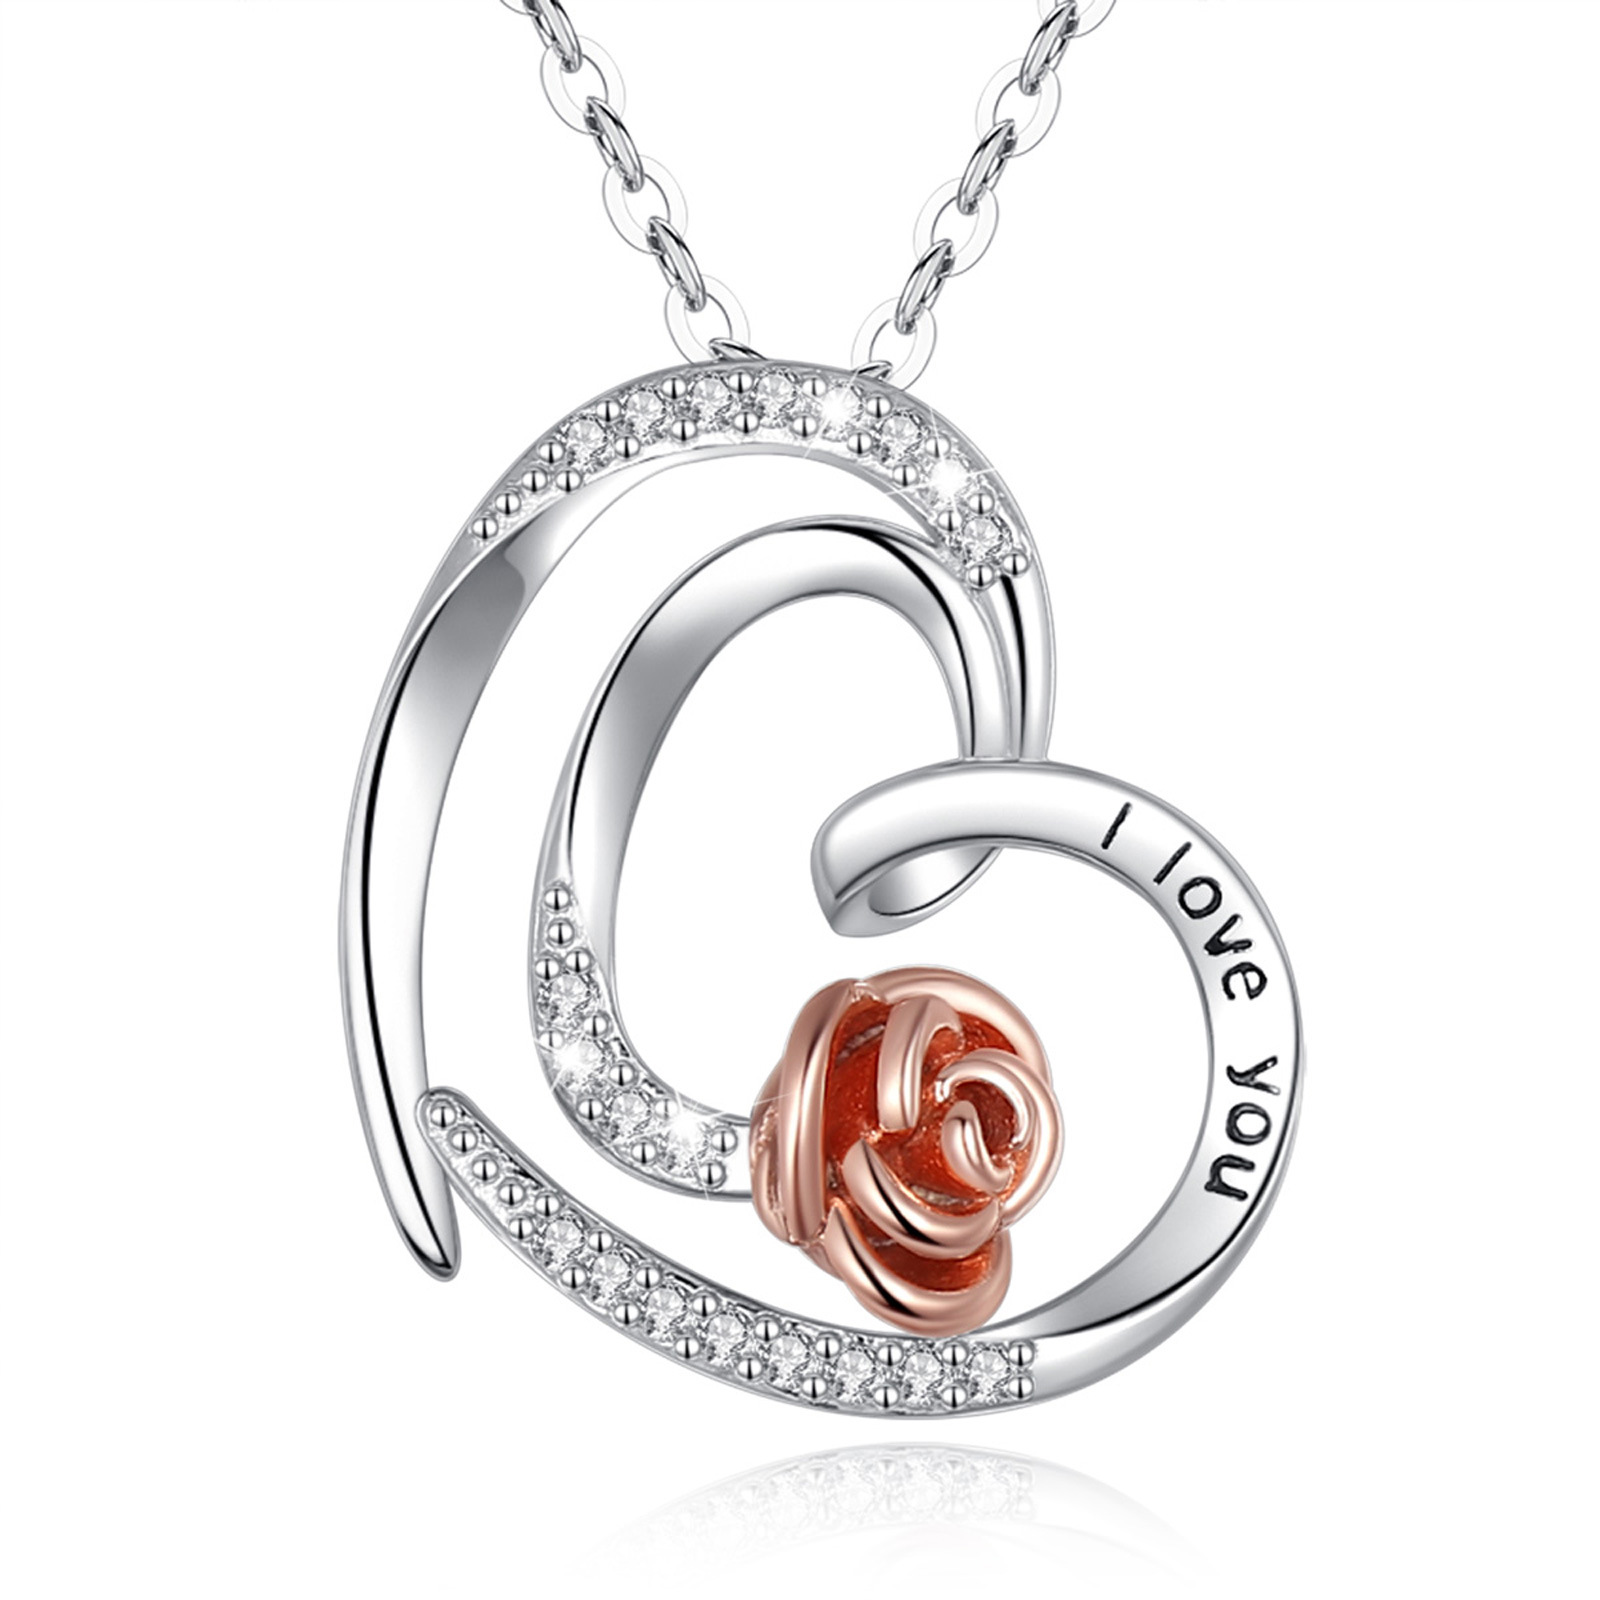 Merryshine Jewelry S925 Sterling Silver Rose Flower Heart Pendant Necklace With CZ Diamond